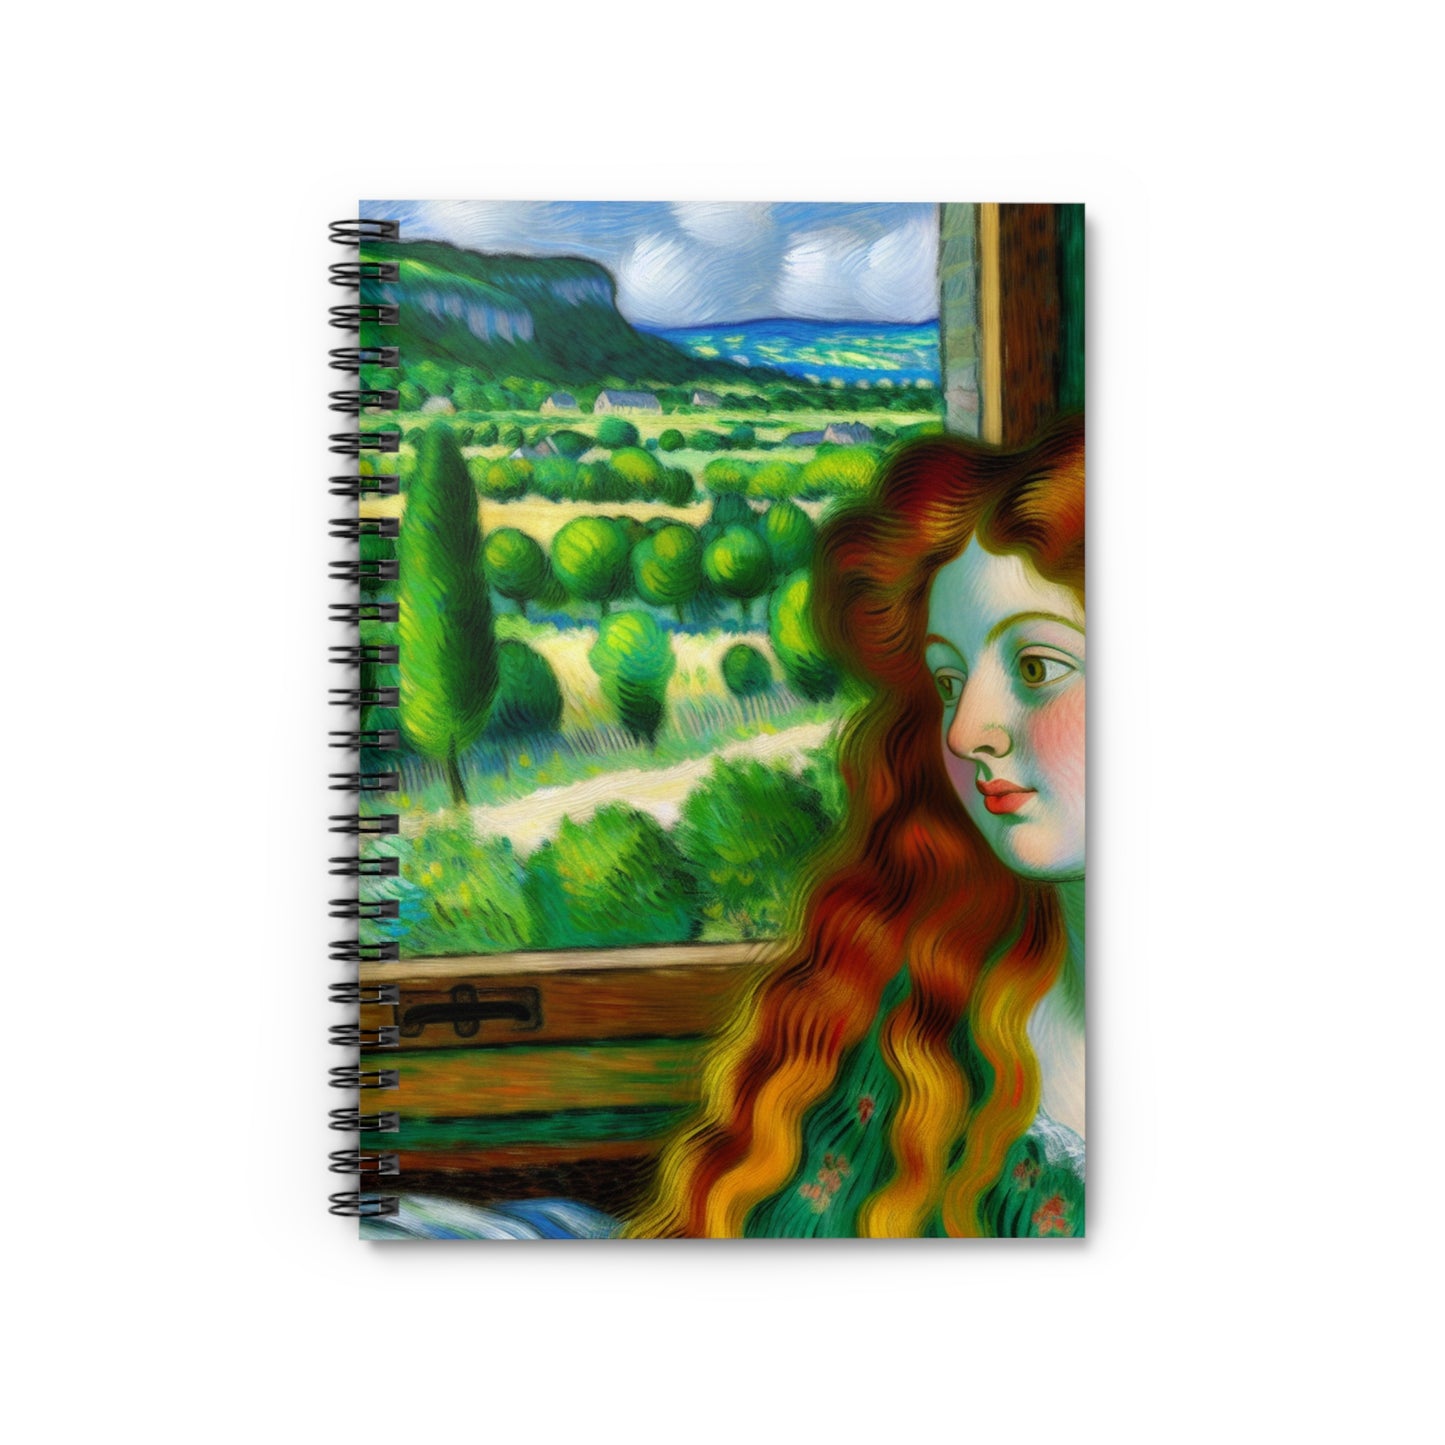 "French Countryside Escape" - The Alien Spiral Notebook (Ruled Line) Post-Impressionism Style